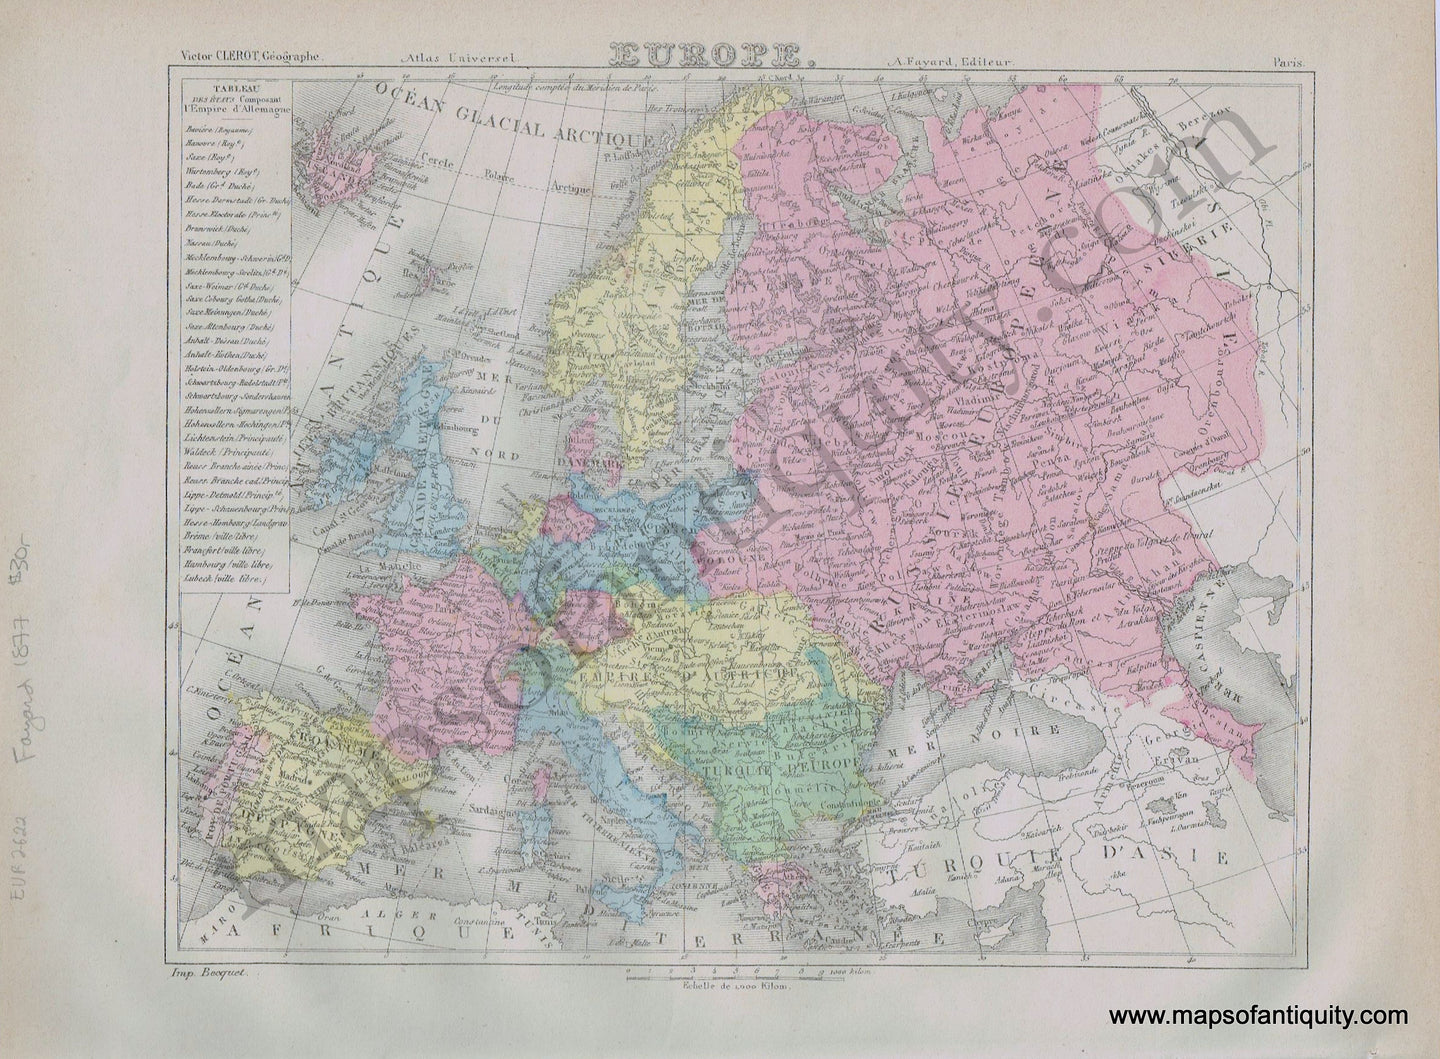 Antique-Printed-Color-Map-Europe-Europe--1877-Fayard--1800s-19th-century-Maps-of-Antiquity